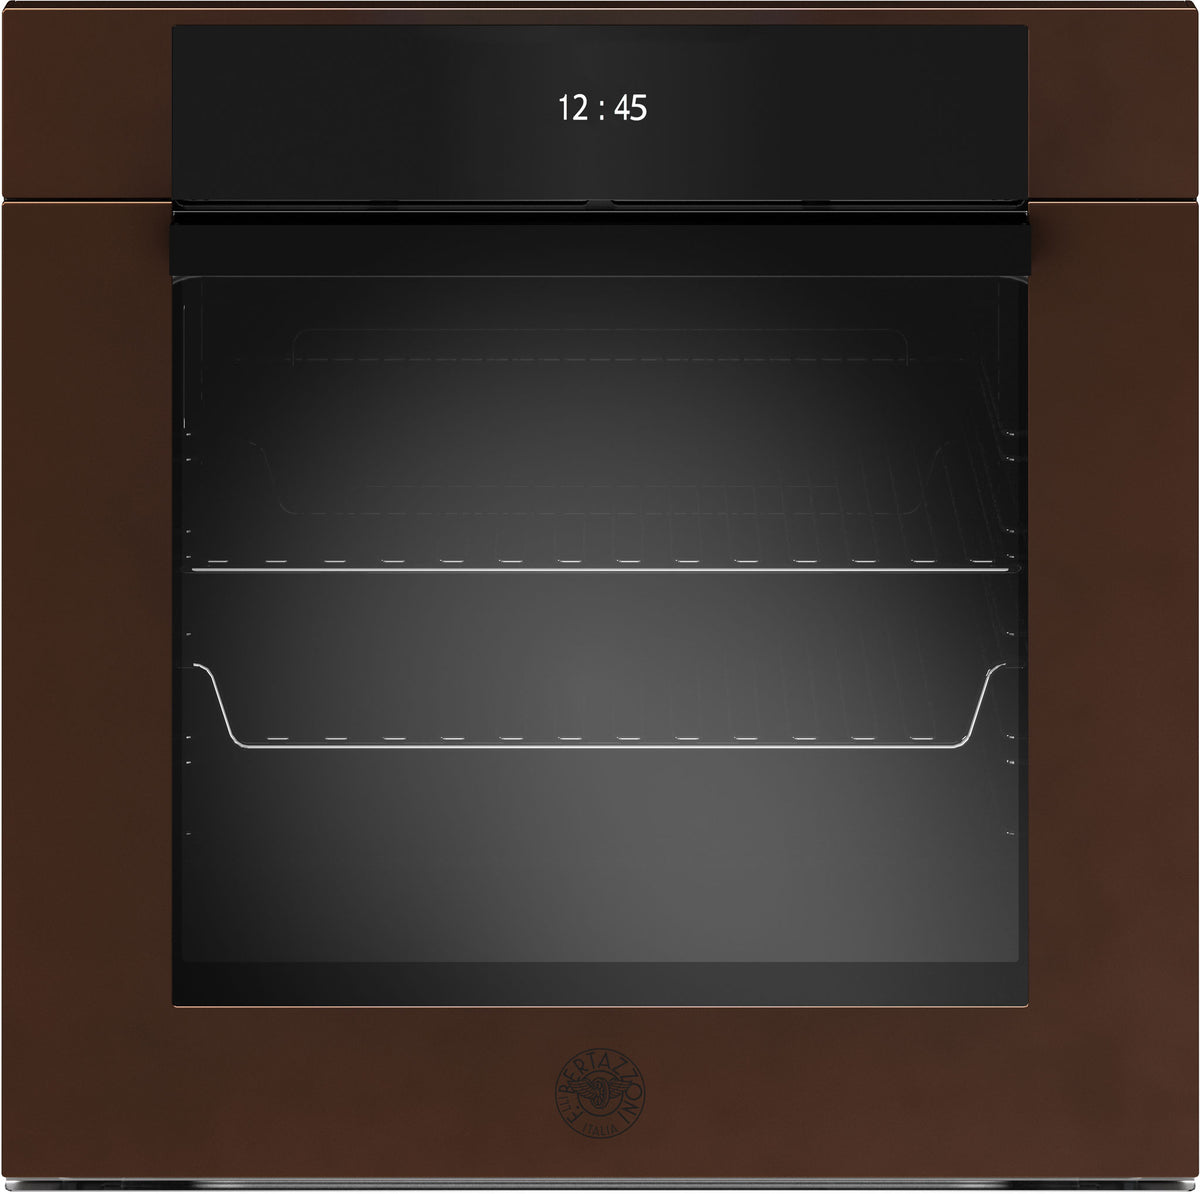 BERTAZZONI F6011MODVPTC 60cm Electric Multifunction Oven with steam cooking and Pyrolytic cleaning in Copper